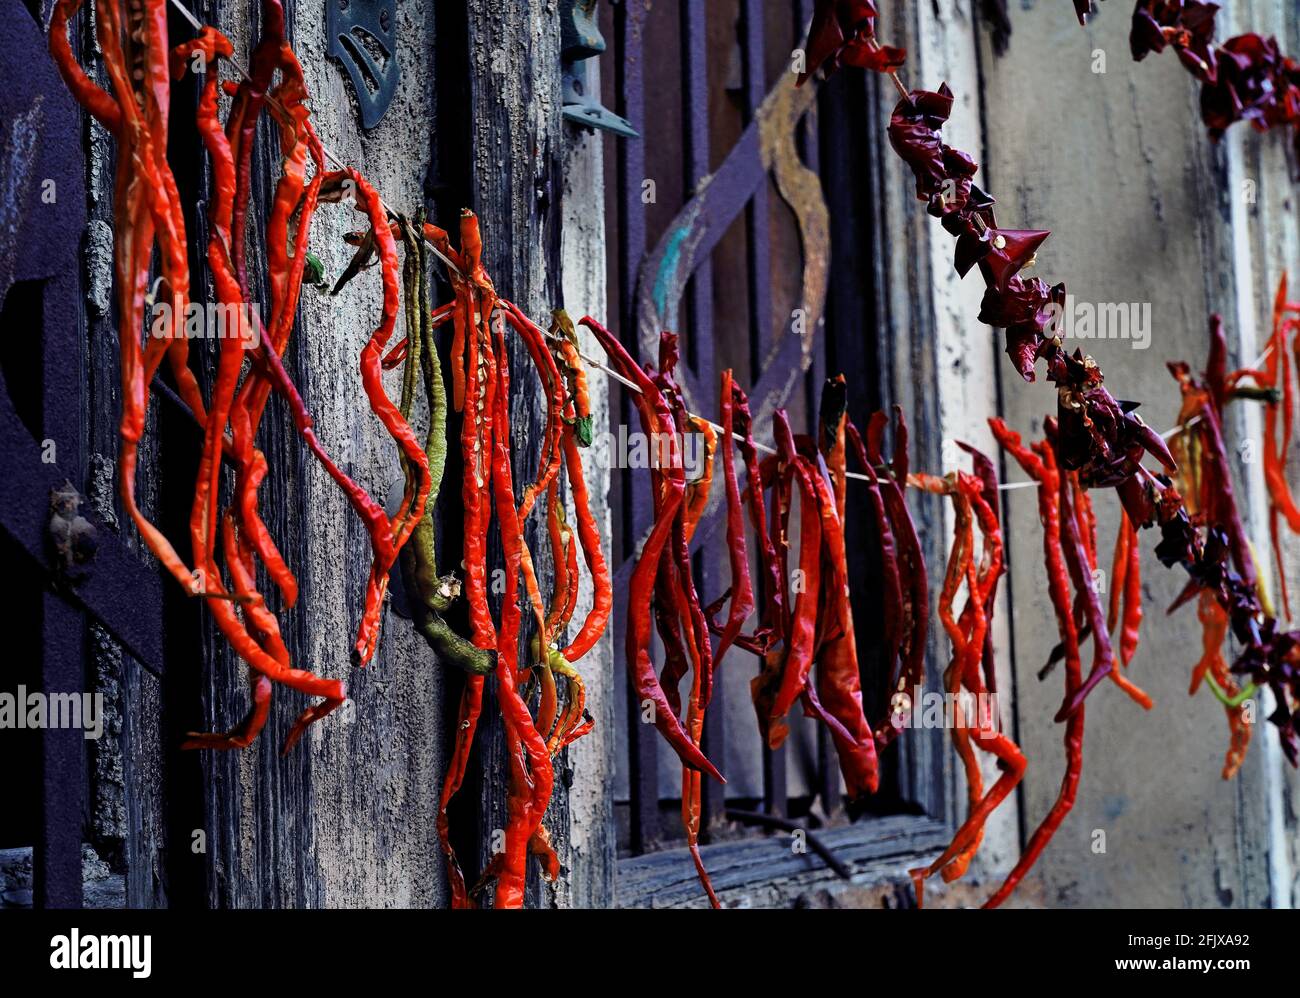 Hanging red and green pepper drying with air. Stock Photo